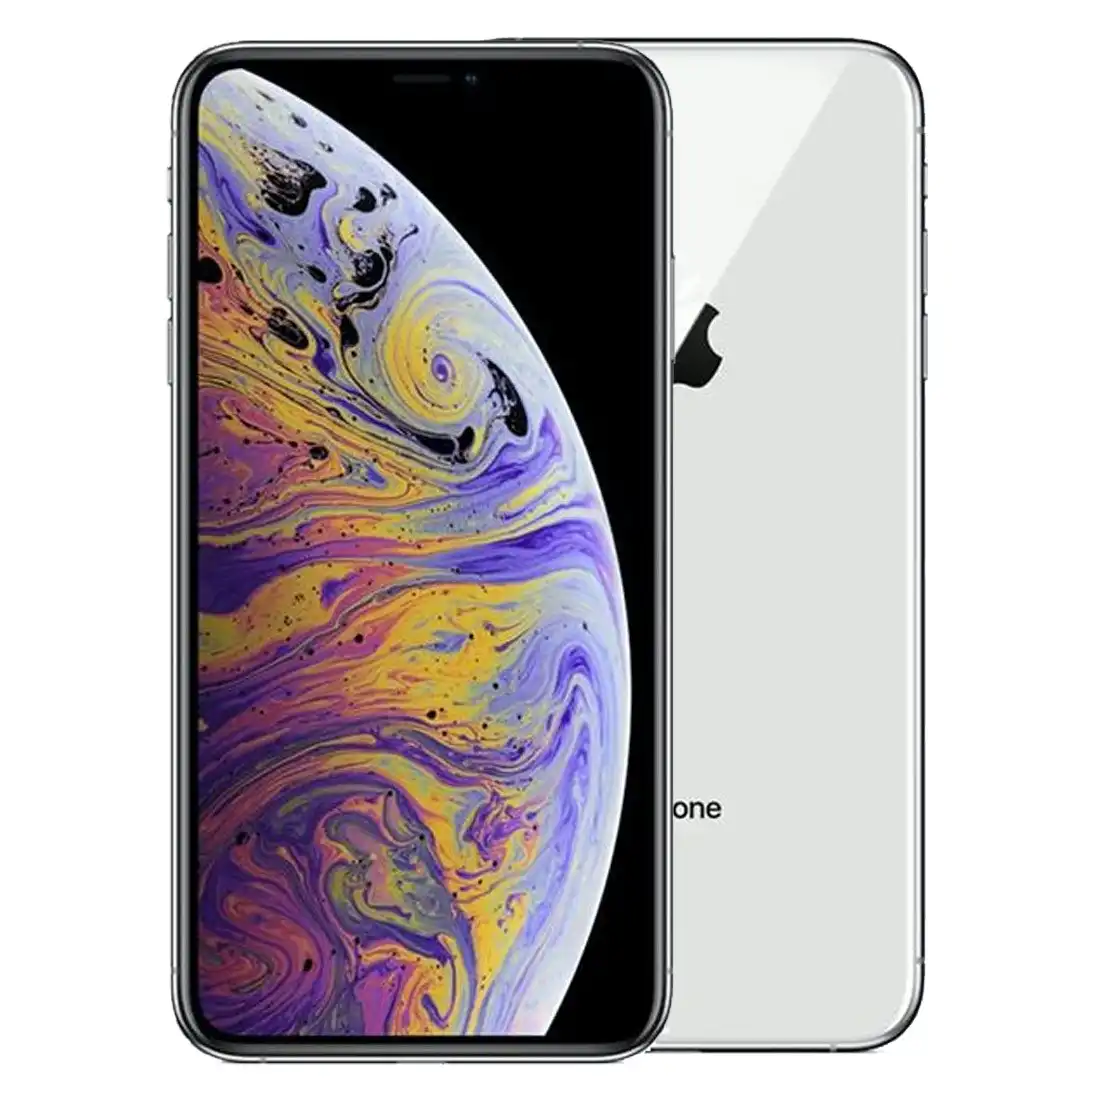 Apple iPhone XS Max 512GB - Silver [Refurbished] - As New